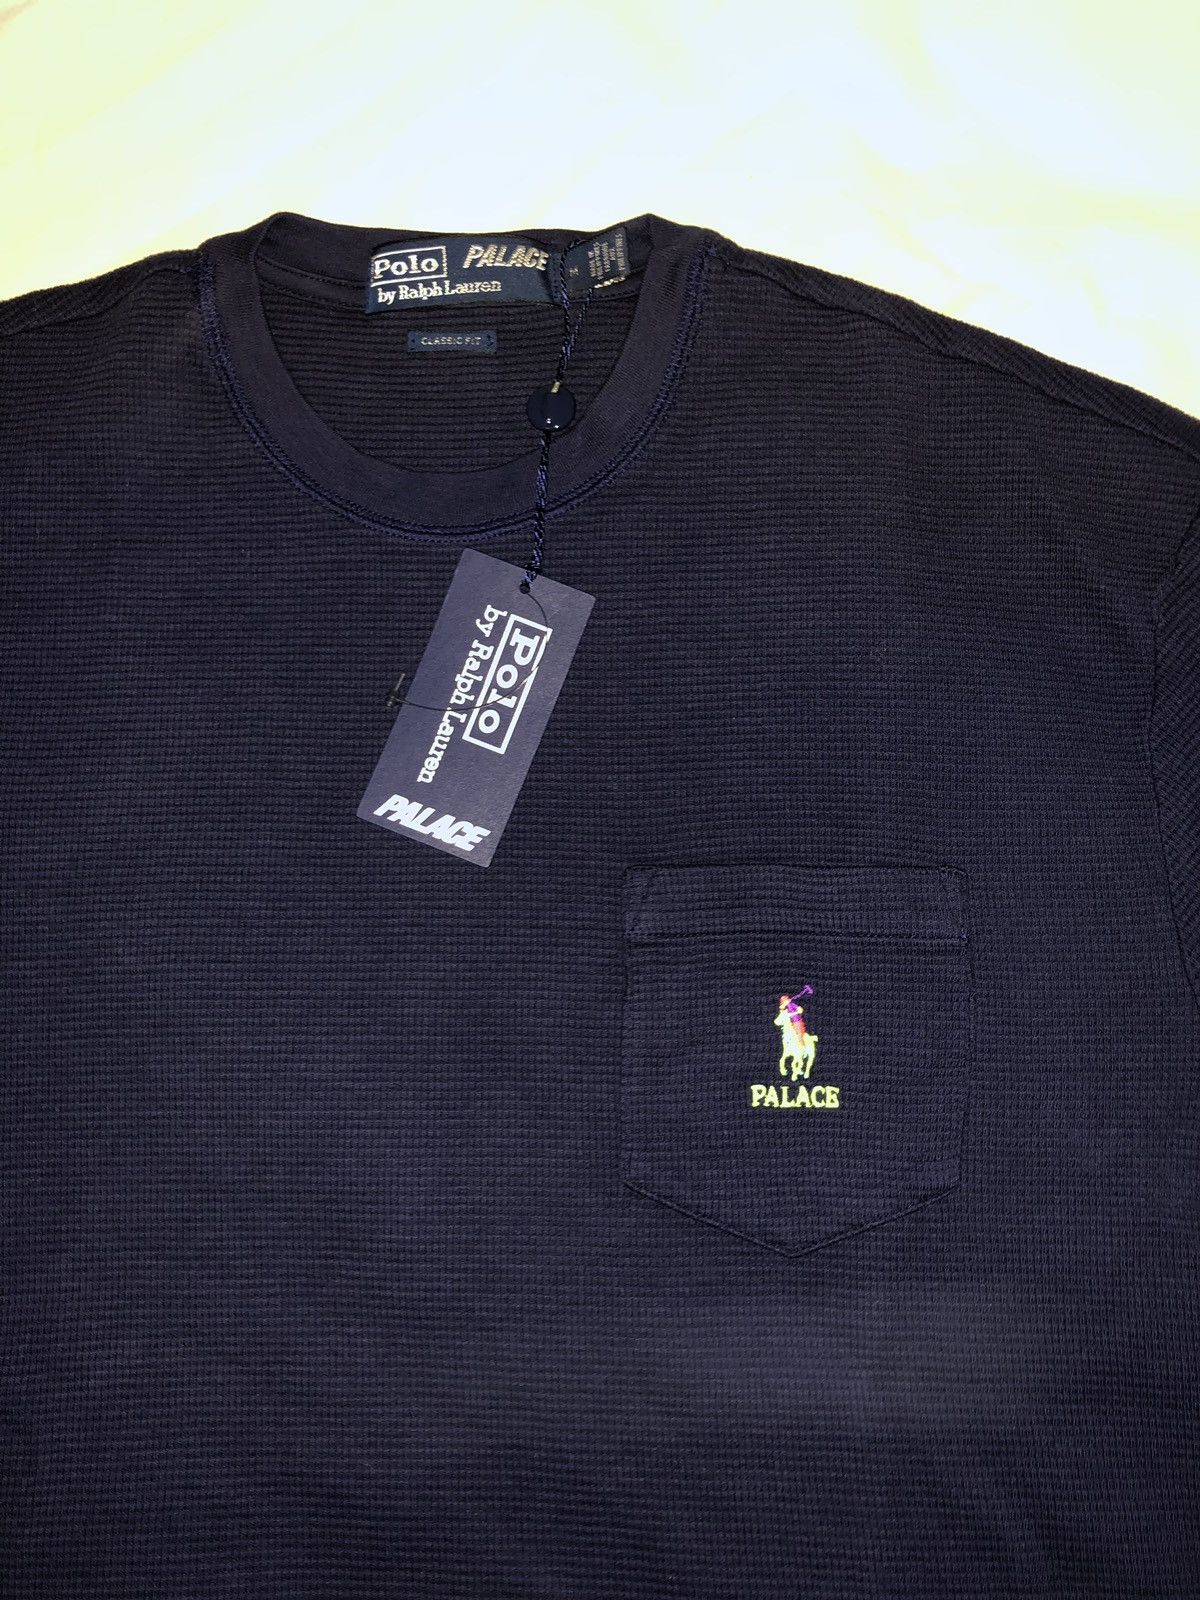 Palace Ralph Lauren Waffle Pocket Tee French Navy